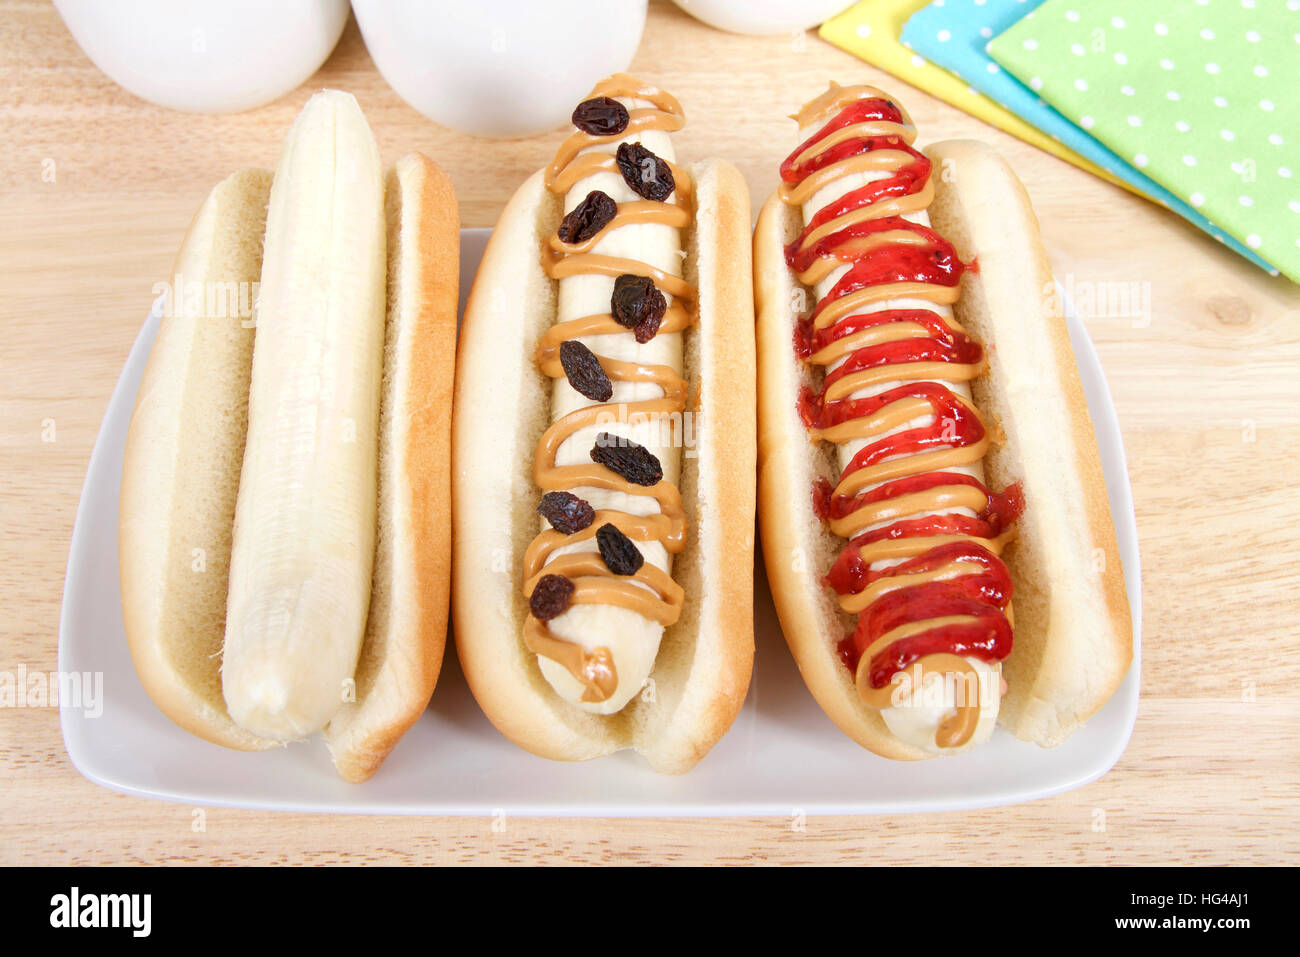 banana dog sandwiches on rectangular plate yellow, green and blue polka dot napkins cups behind in background. Banana in a hot dog bun, plain, with pe Stock Photo